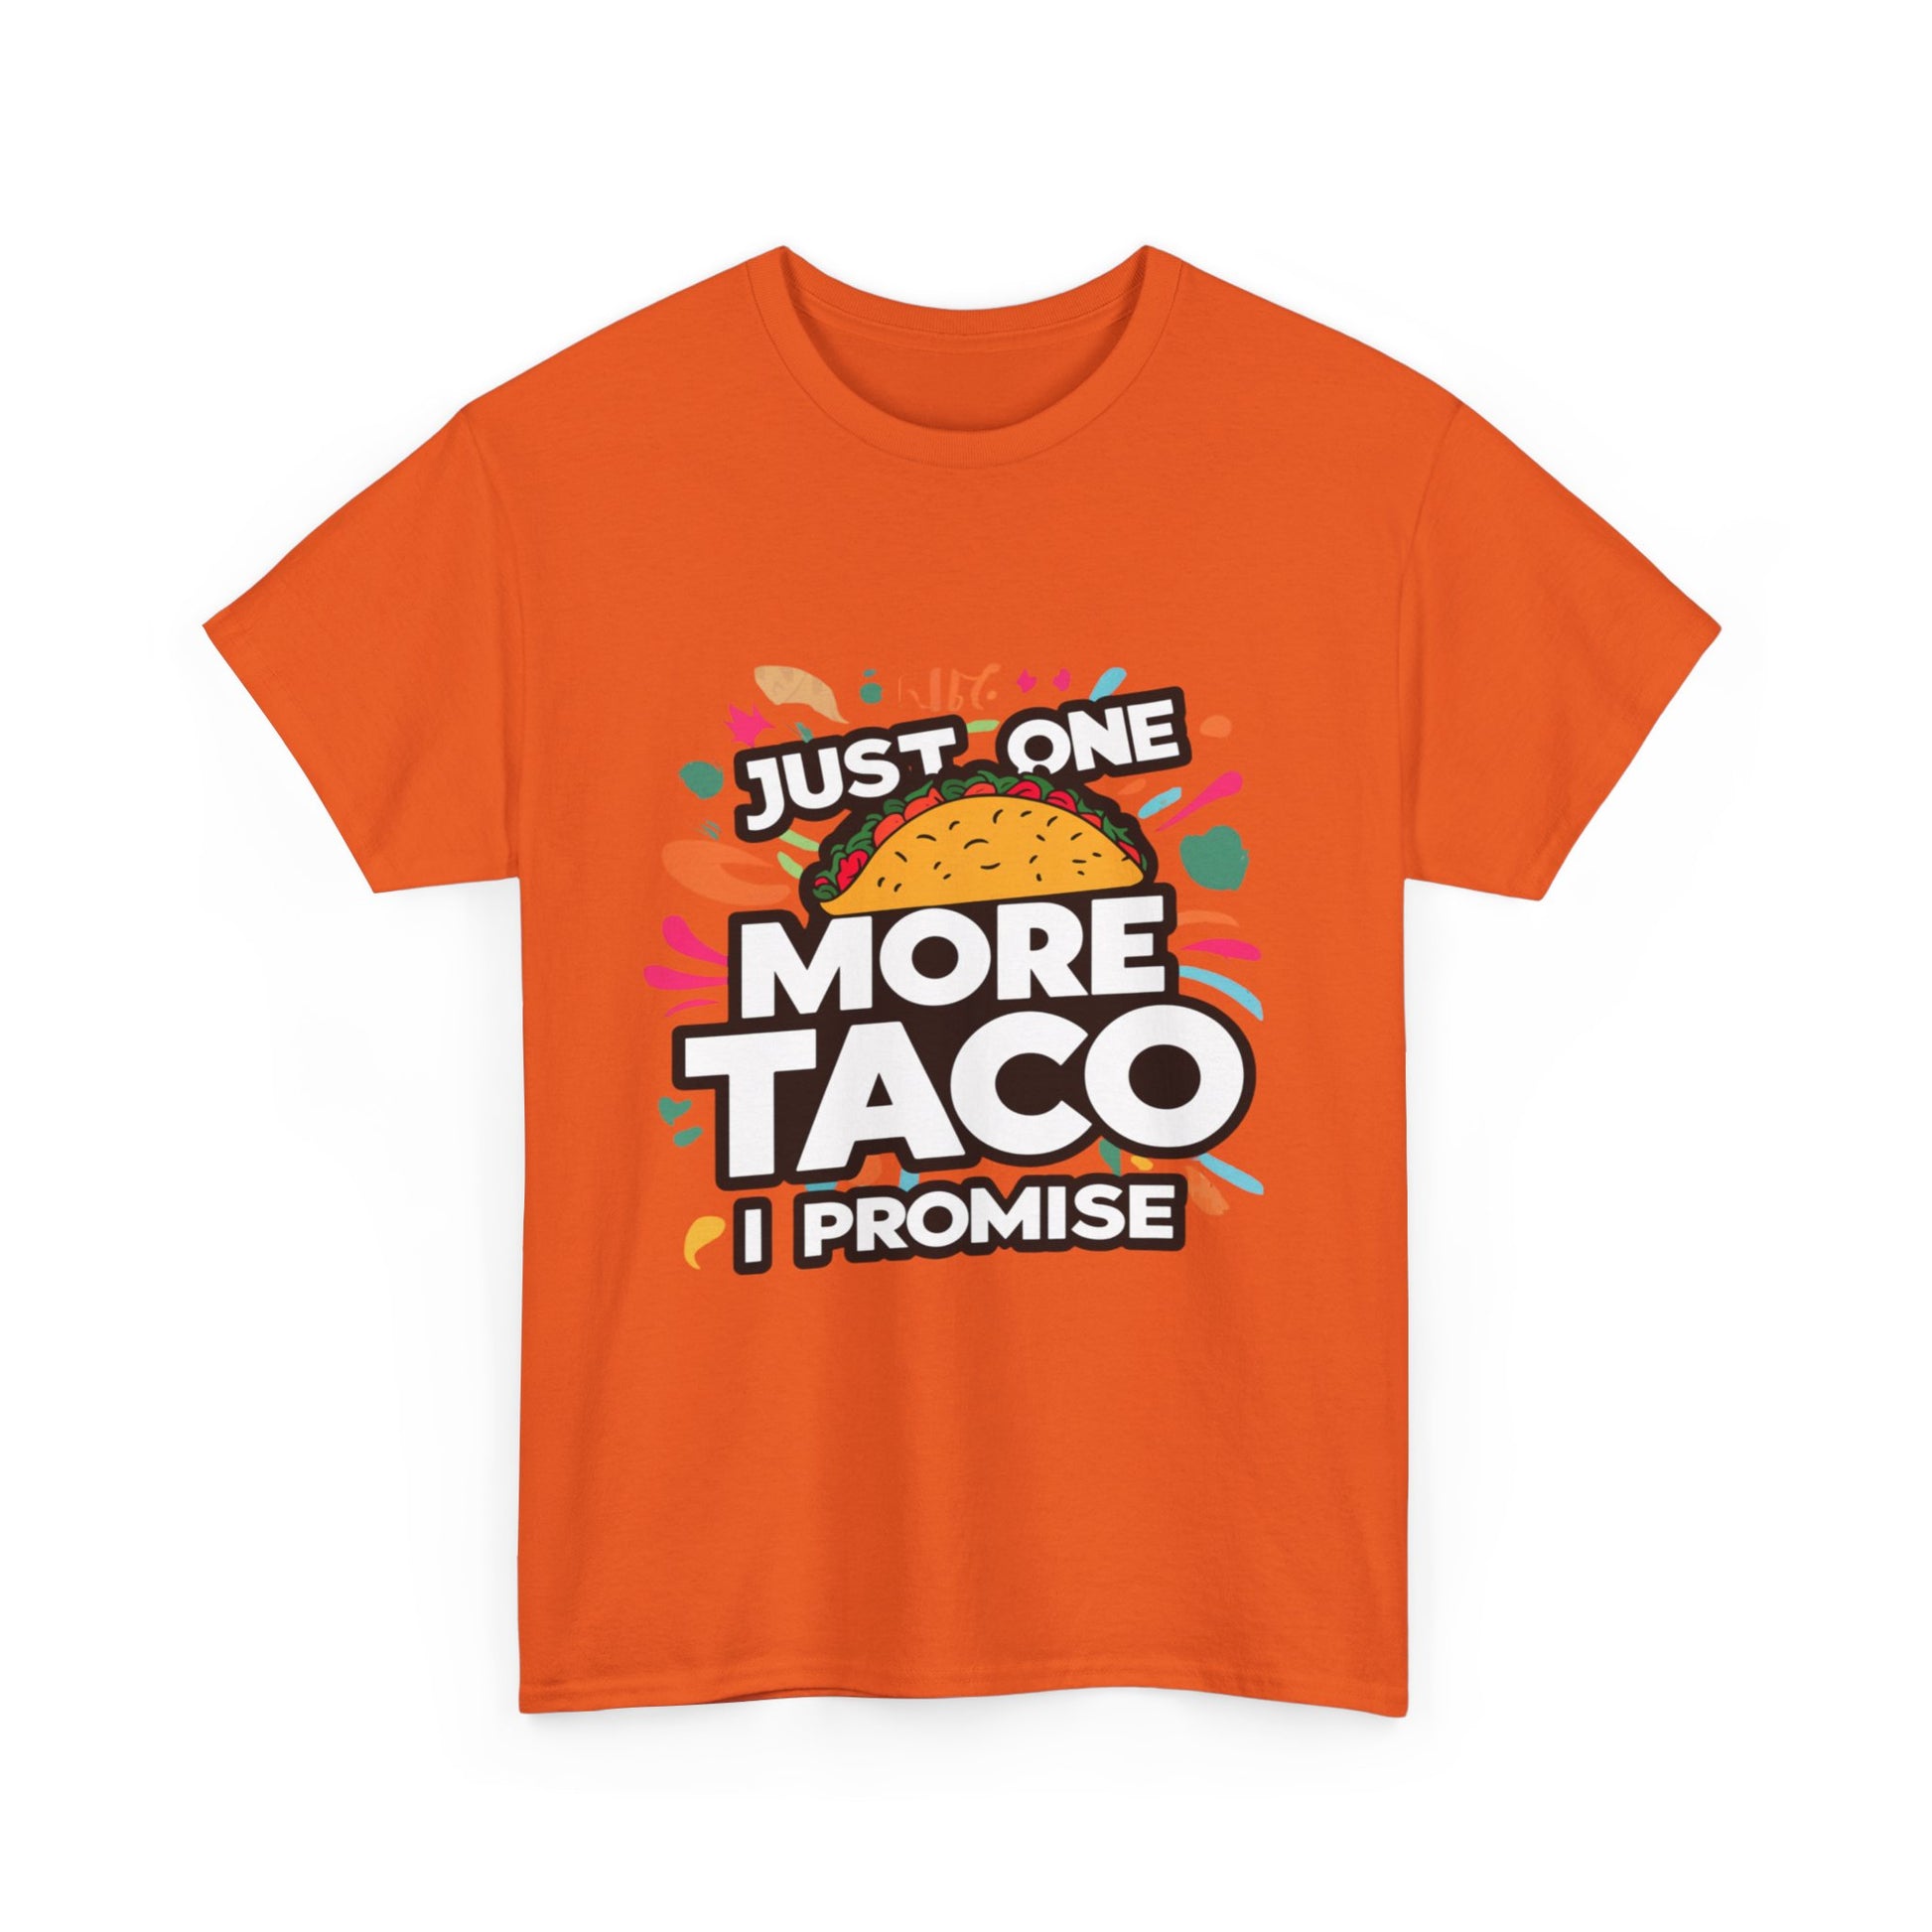 Just One More Taco I Promise Mexican Food Graphic Unisex Heavy Cotton Tee Cotton Funny Humorous Graphic Soft Premium Unisex Men Women Orange T-shirt Birthday Gift-30